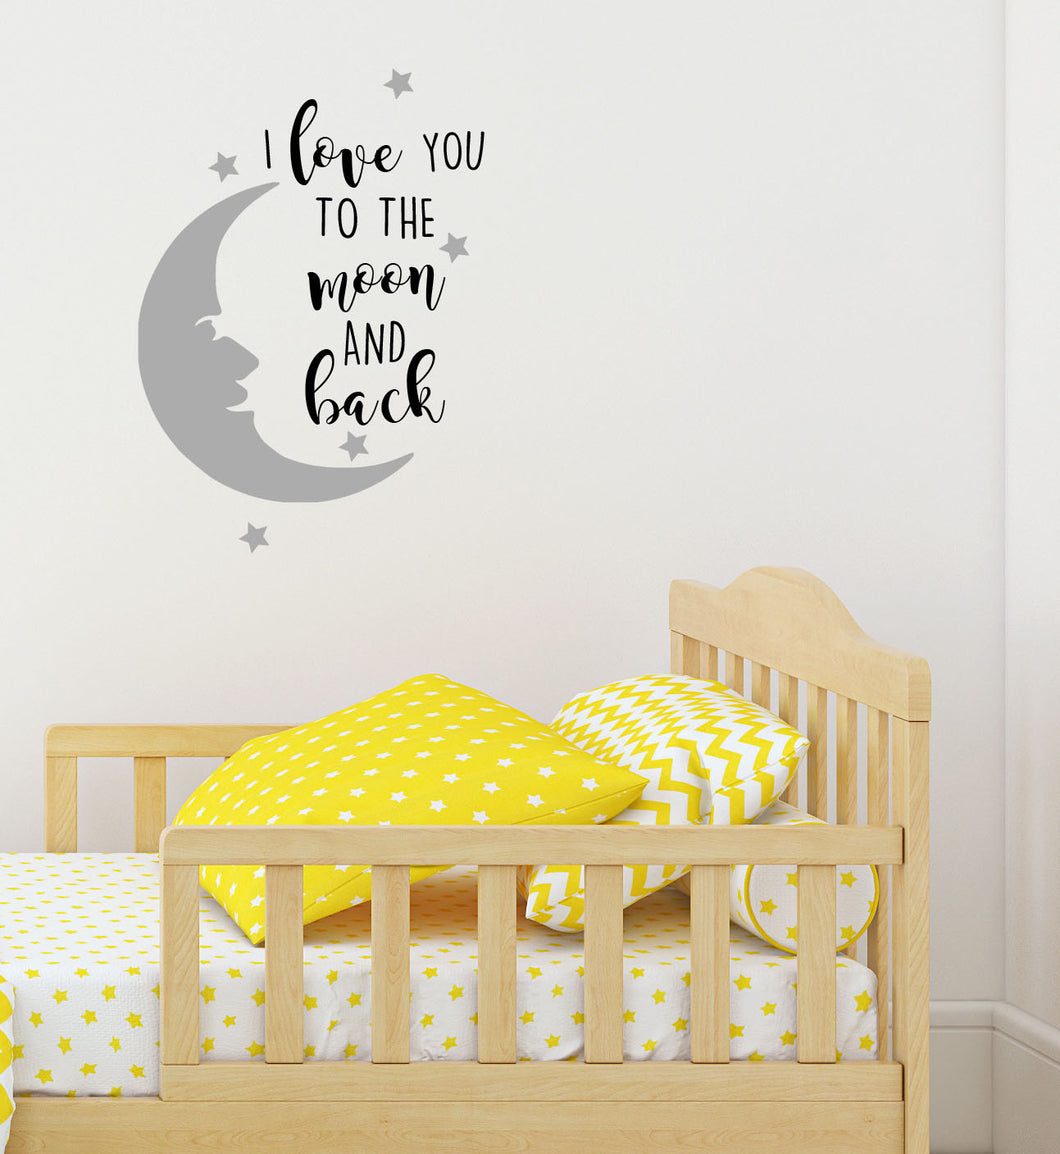 I Love You To The Moon And Back - Children's Wall Art